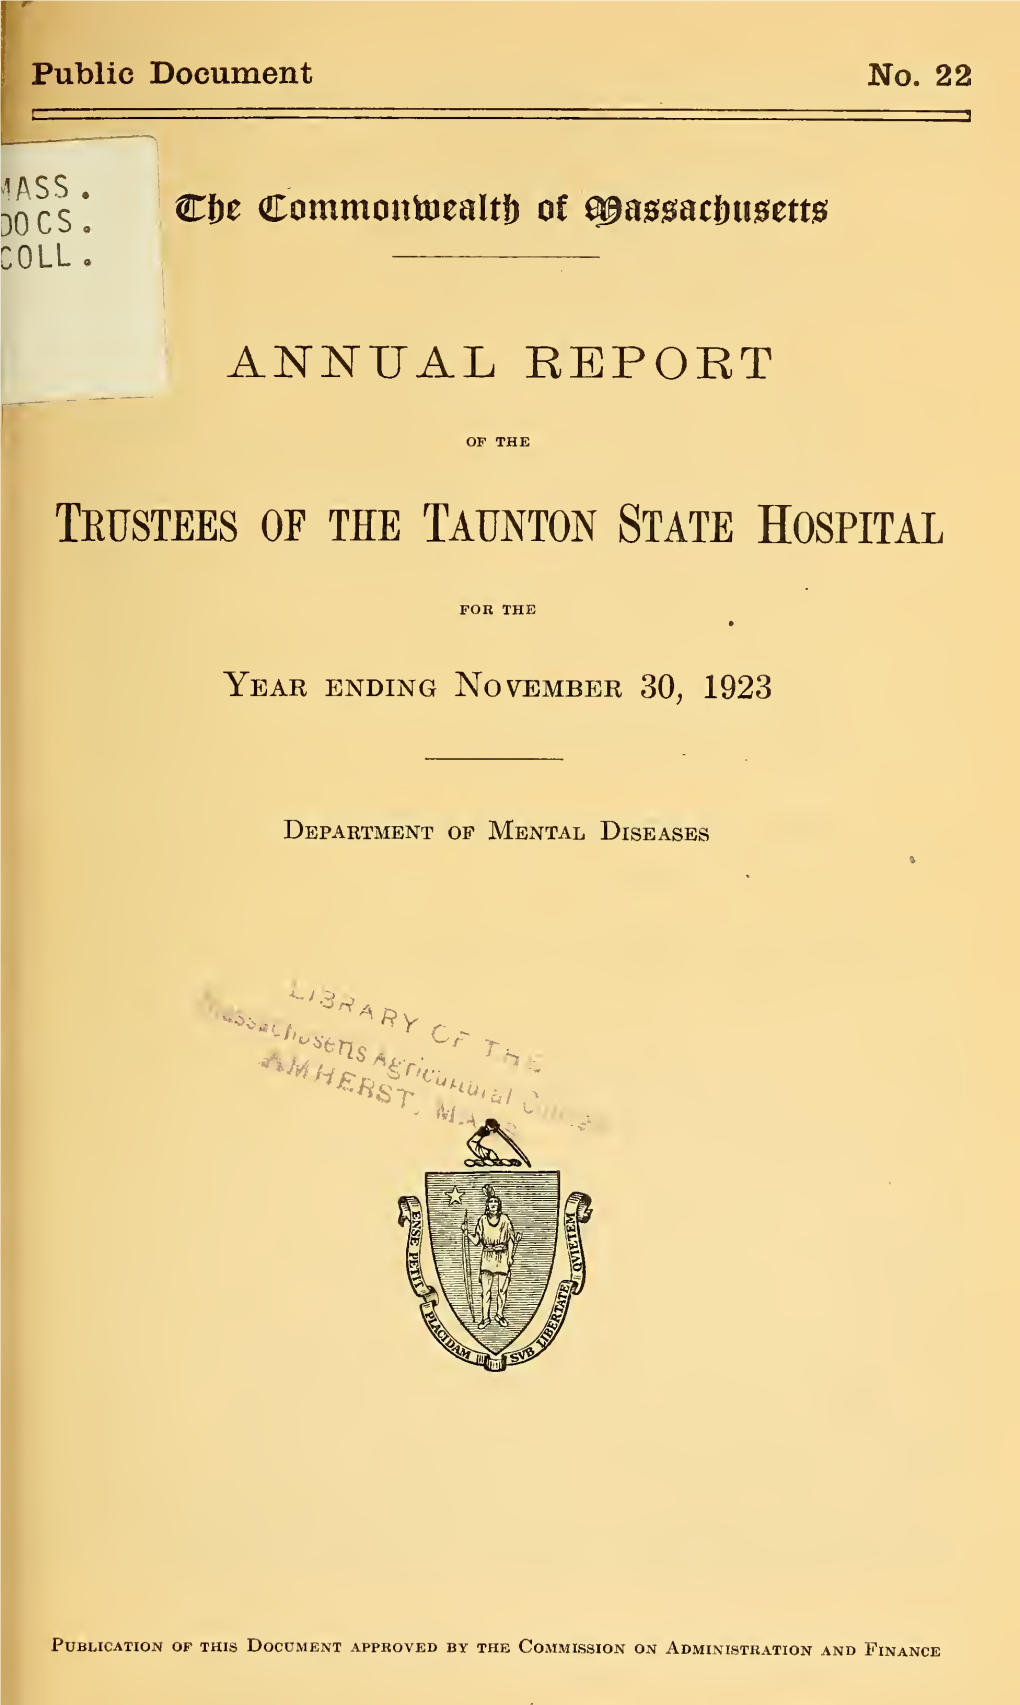 Annual Report of the Trustees of the Taunton State Hospital